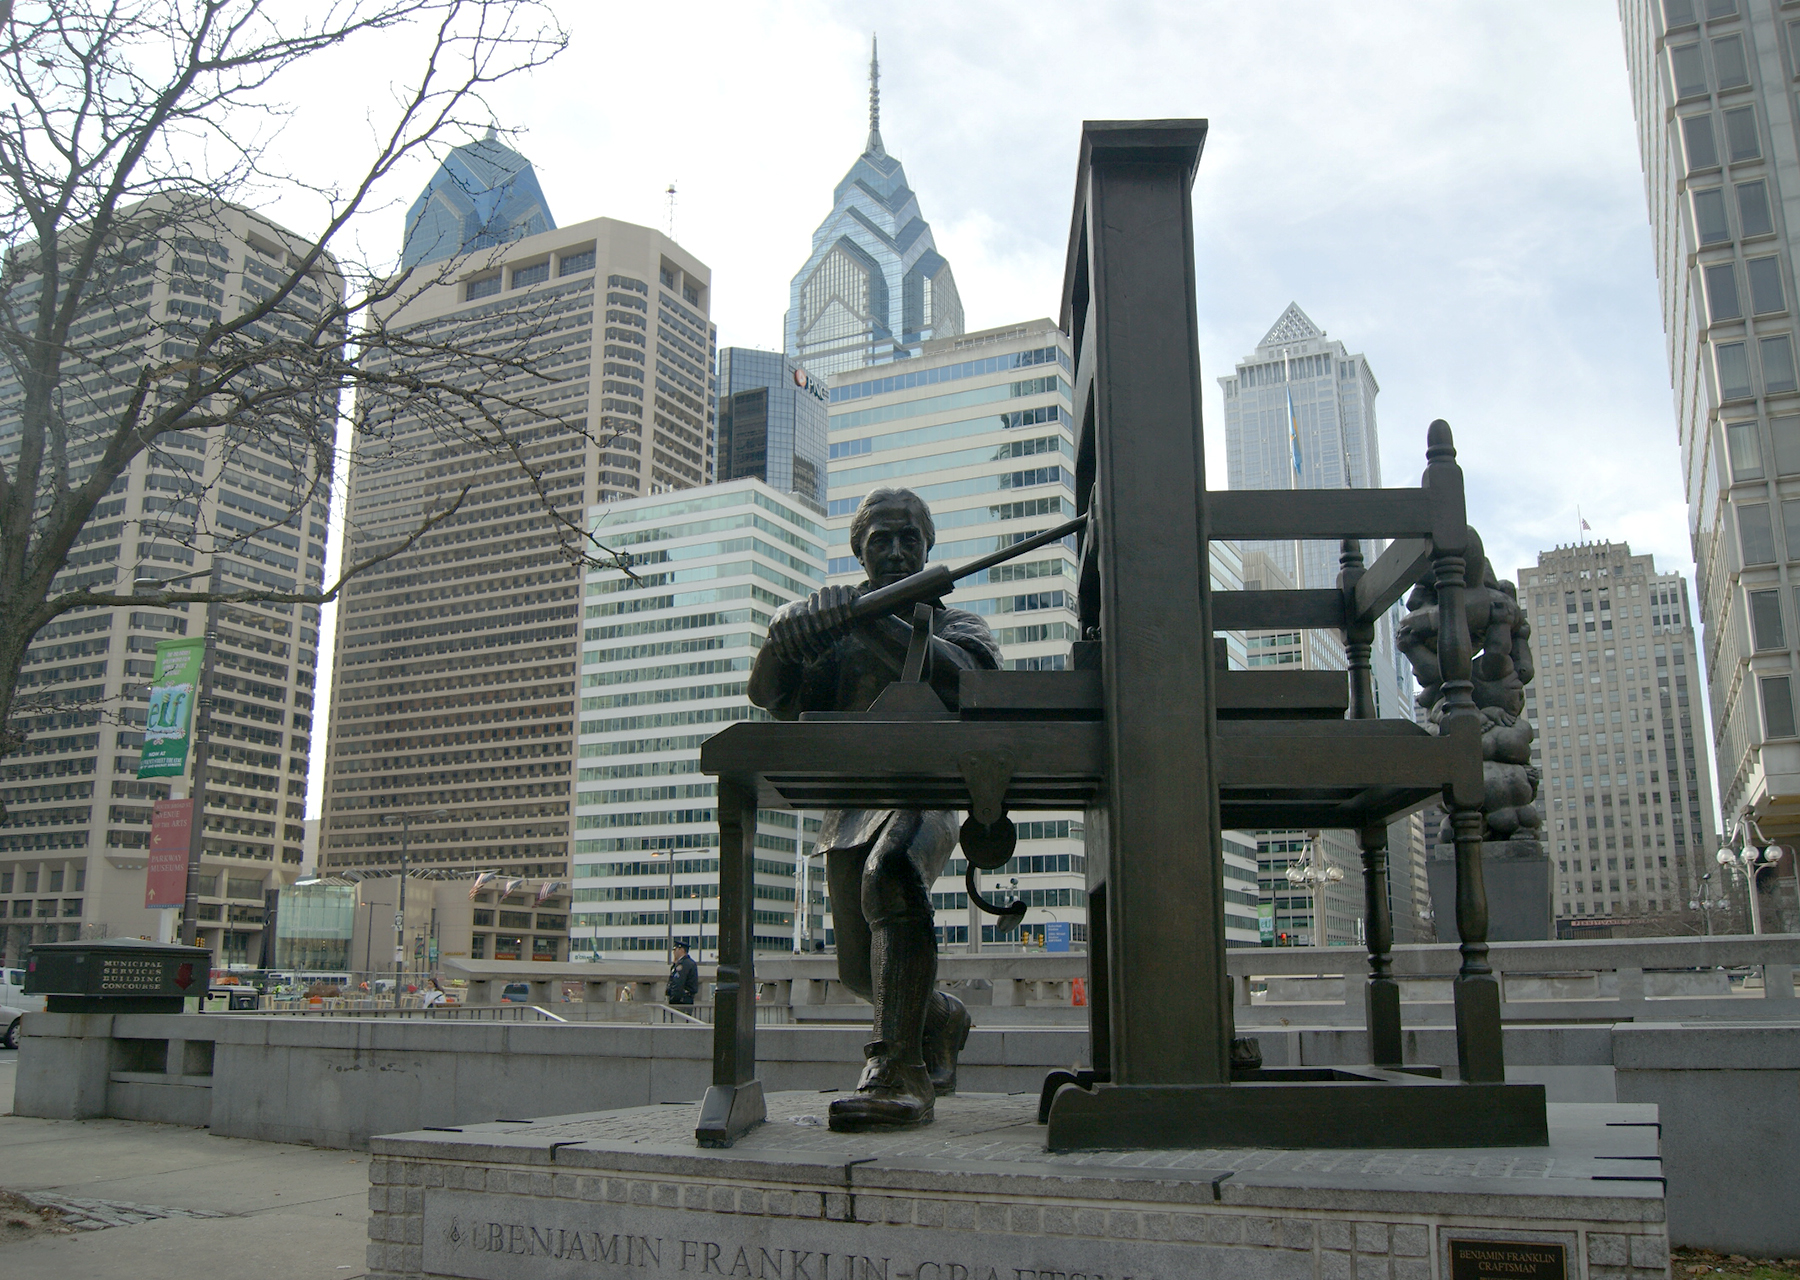 Sculpture of a young Benjamin Franklin working a printing press in Center City Philadelphia